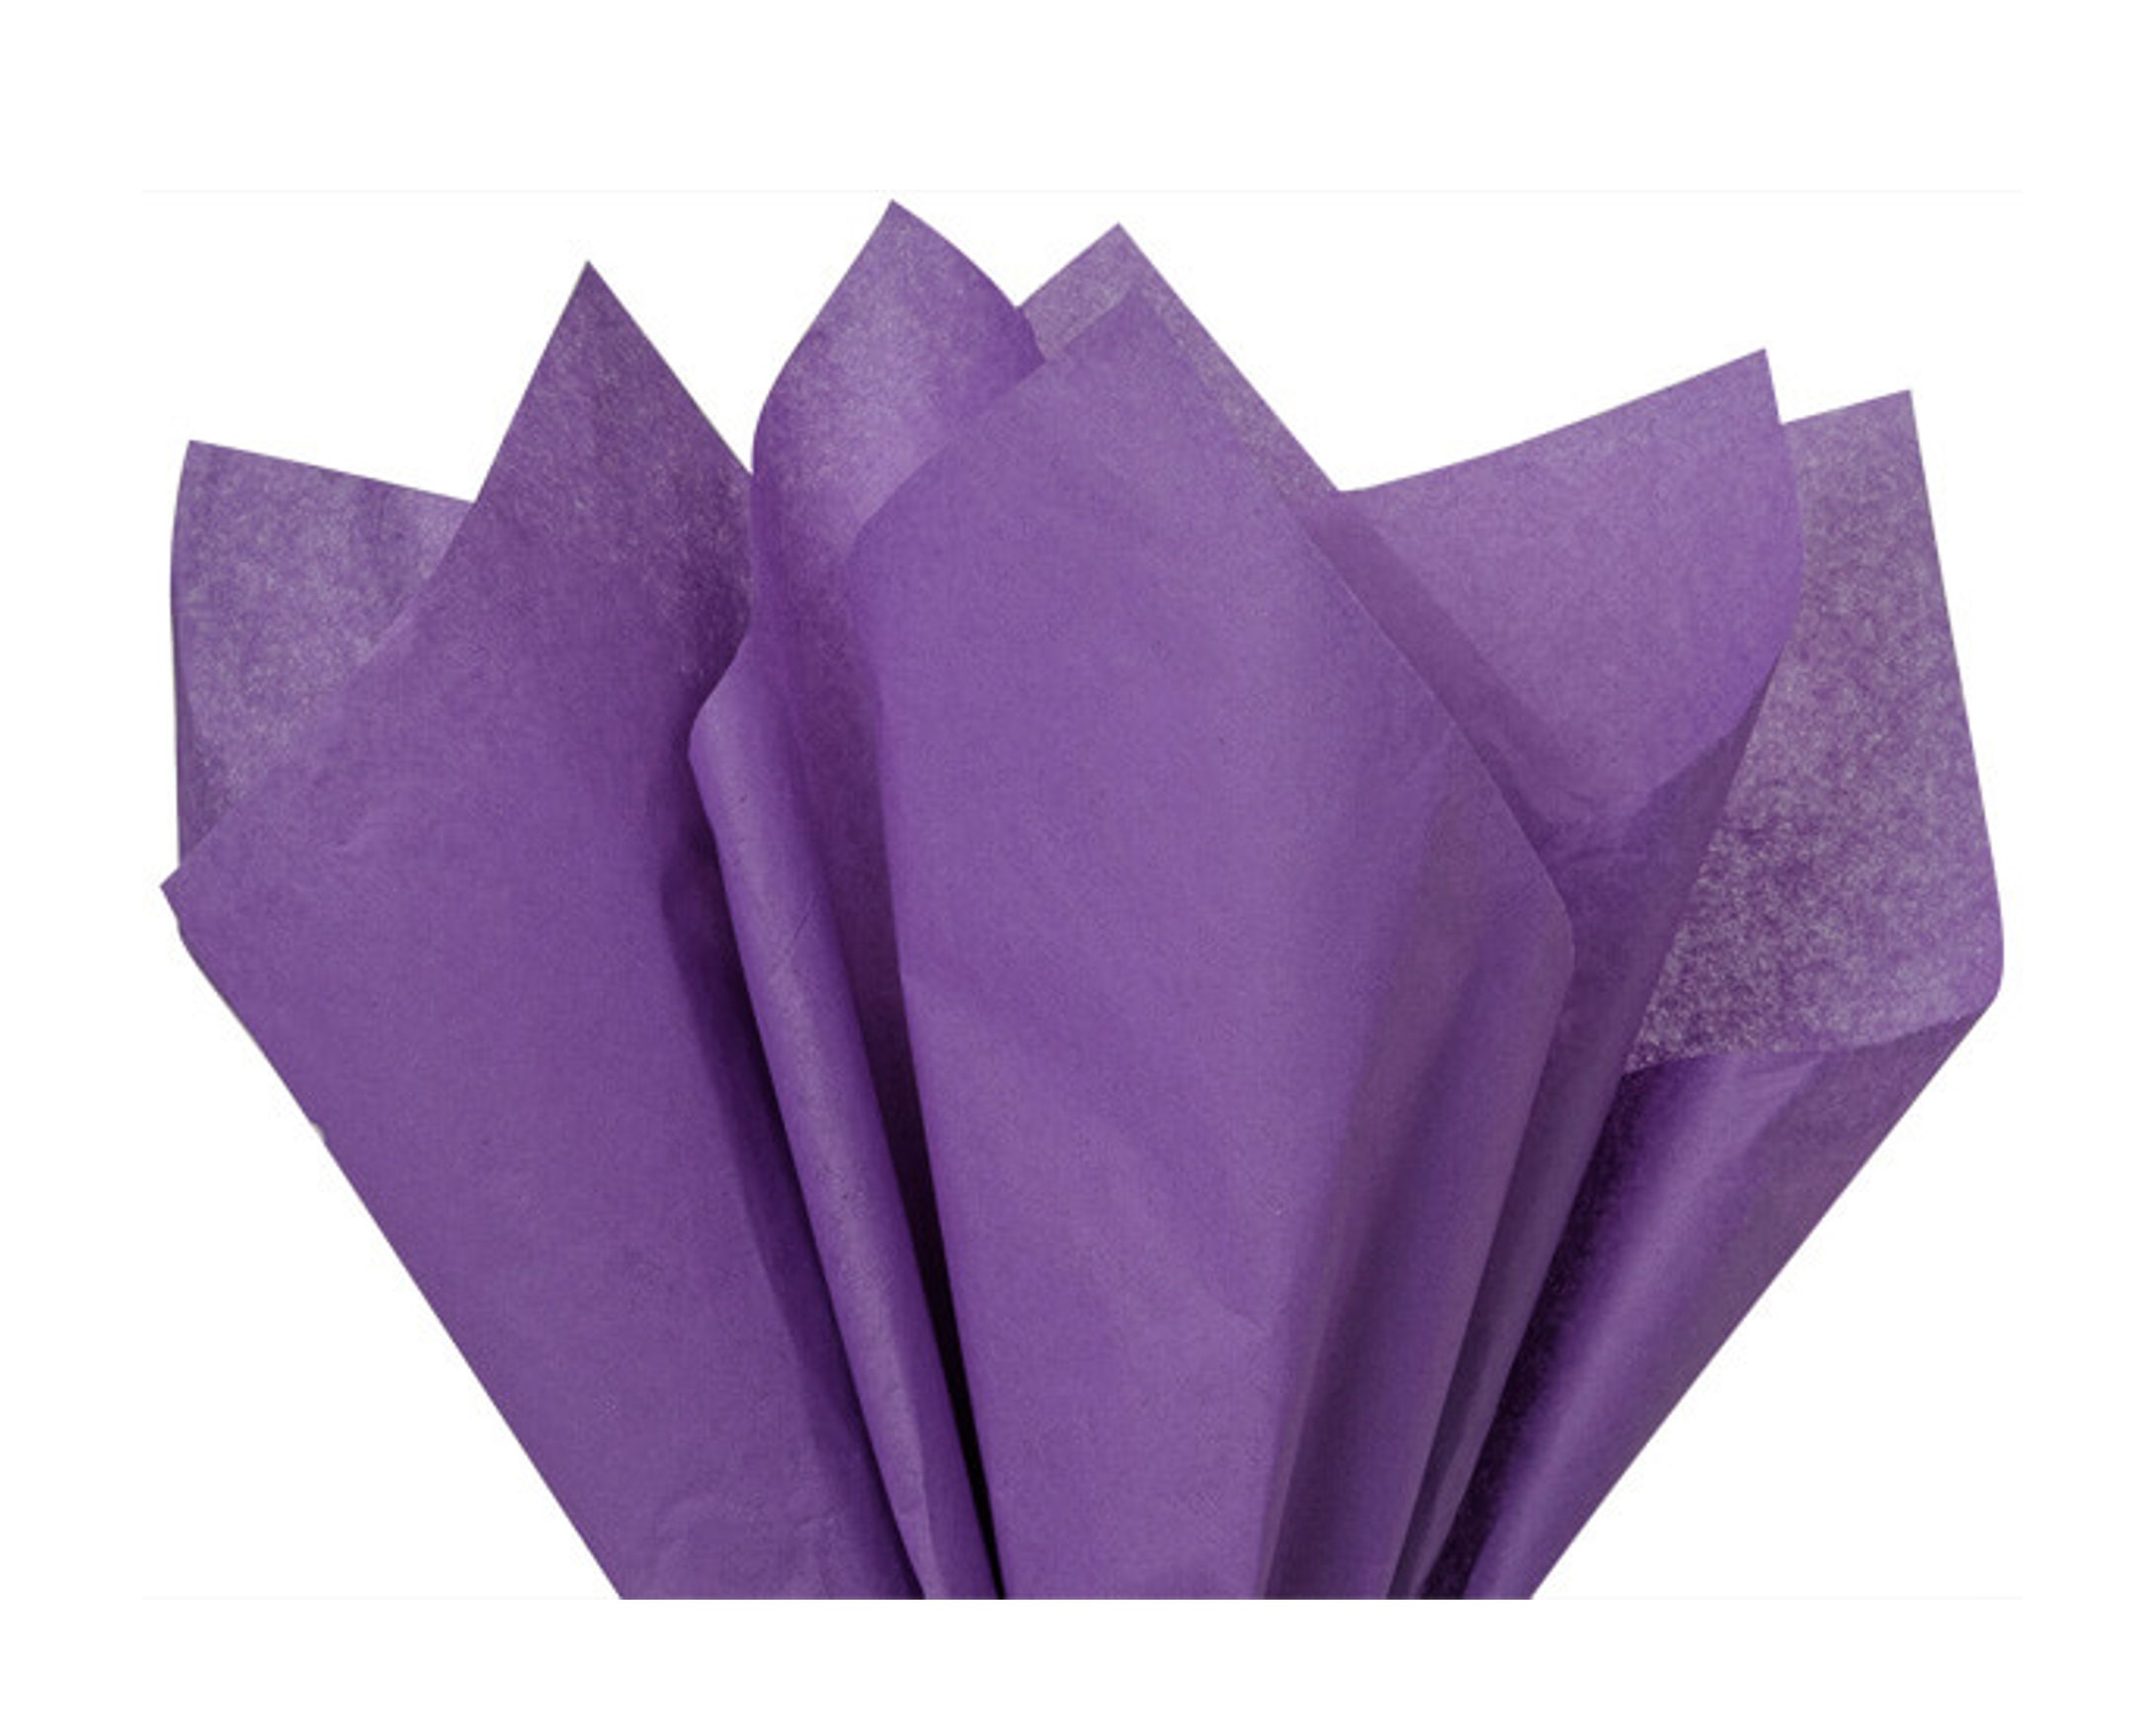 Plum Tissue Paper Squares, Bulk 10 Sheets, Premium Gift Wrap and Art  Supplies for Birthdays, 15 Inch X 20 Inch A1bakerysupplies 